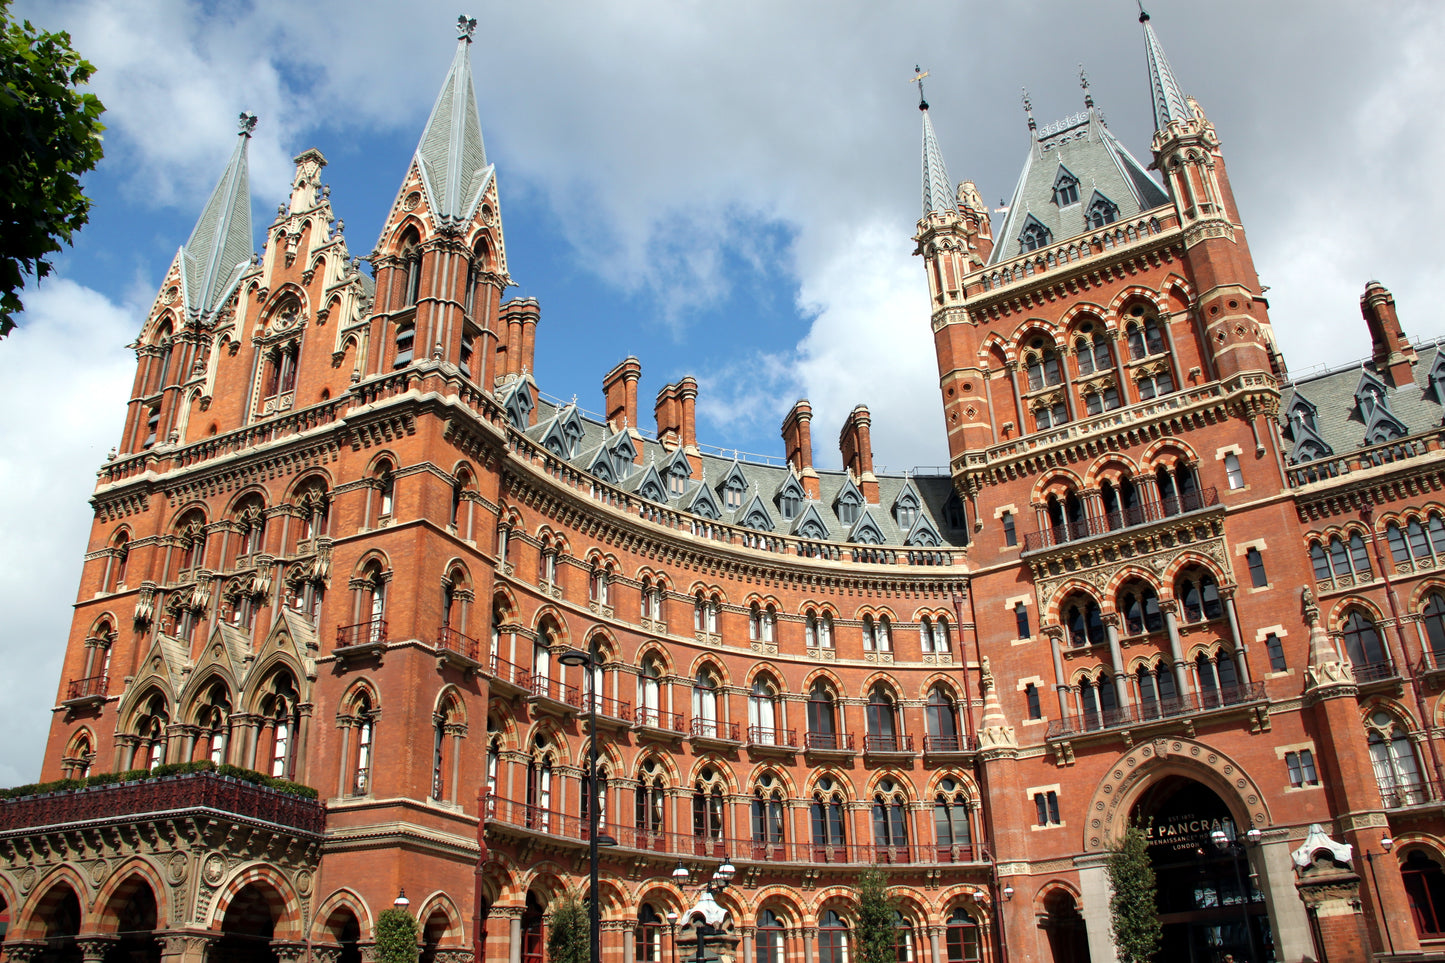 ST PANCRAS LONDON UK TRAIN STATION GLOSSY POSTER PICTURE PHOTO PRINT BANNER